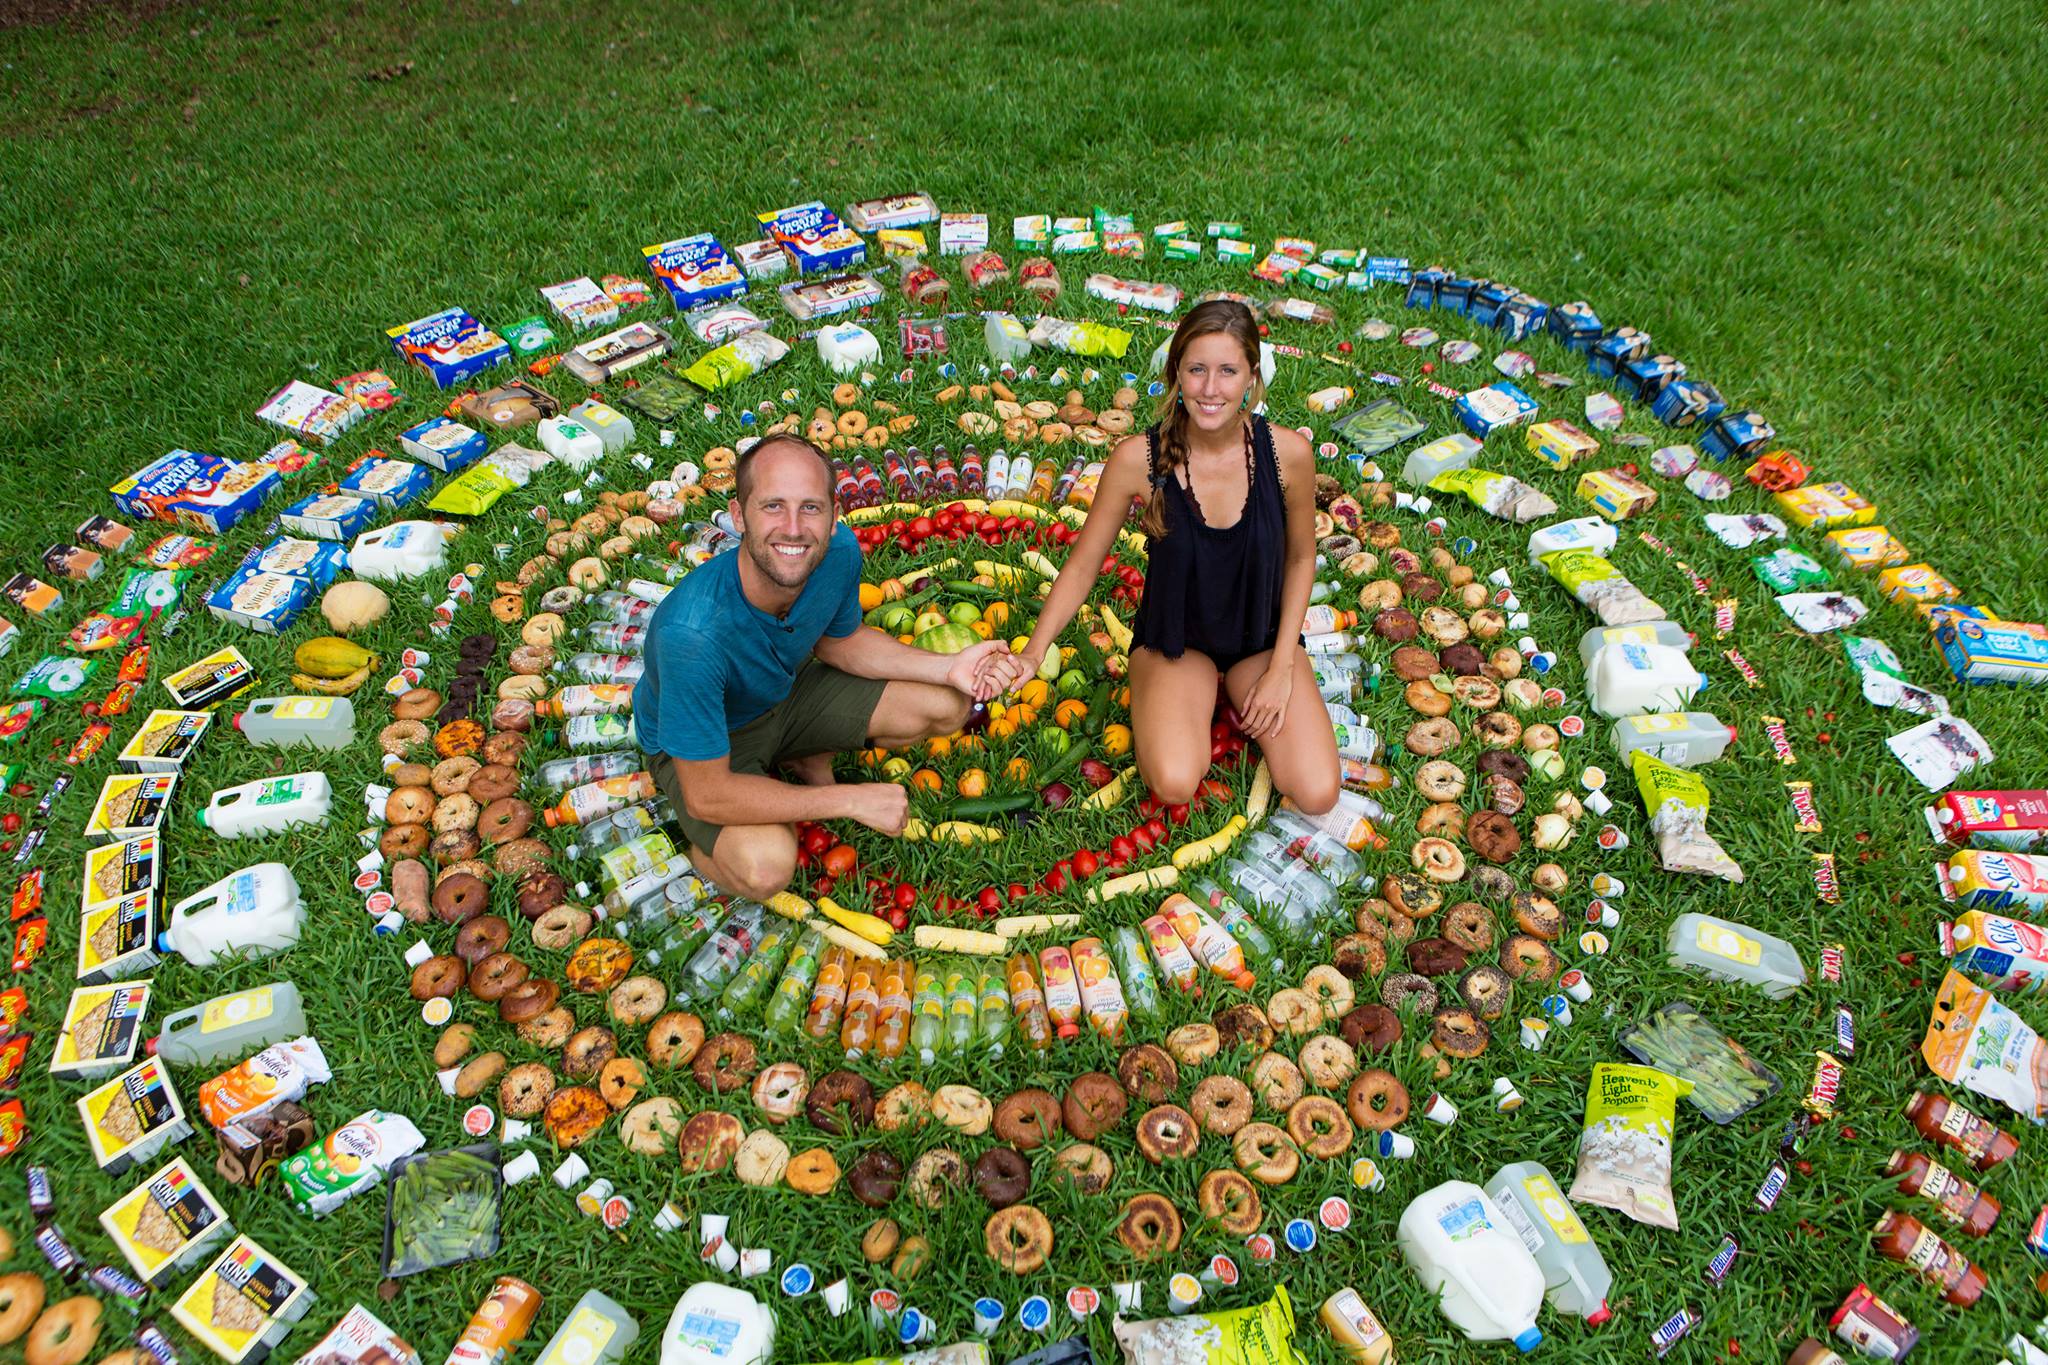 ‘Would you believe that every single piece of food you see here came from a dumpster? Mind blowing, but this is actually nothing. We throw away nearly half of all food produced in America which is about $165 billion worth! All while 50 million Americans are food insecure or hungry!’ — Rob Greenfield, pictured with Cheryl Davies.